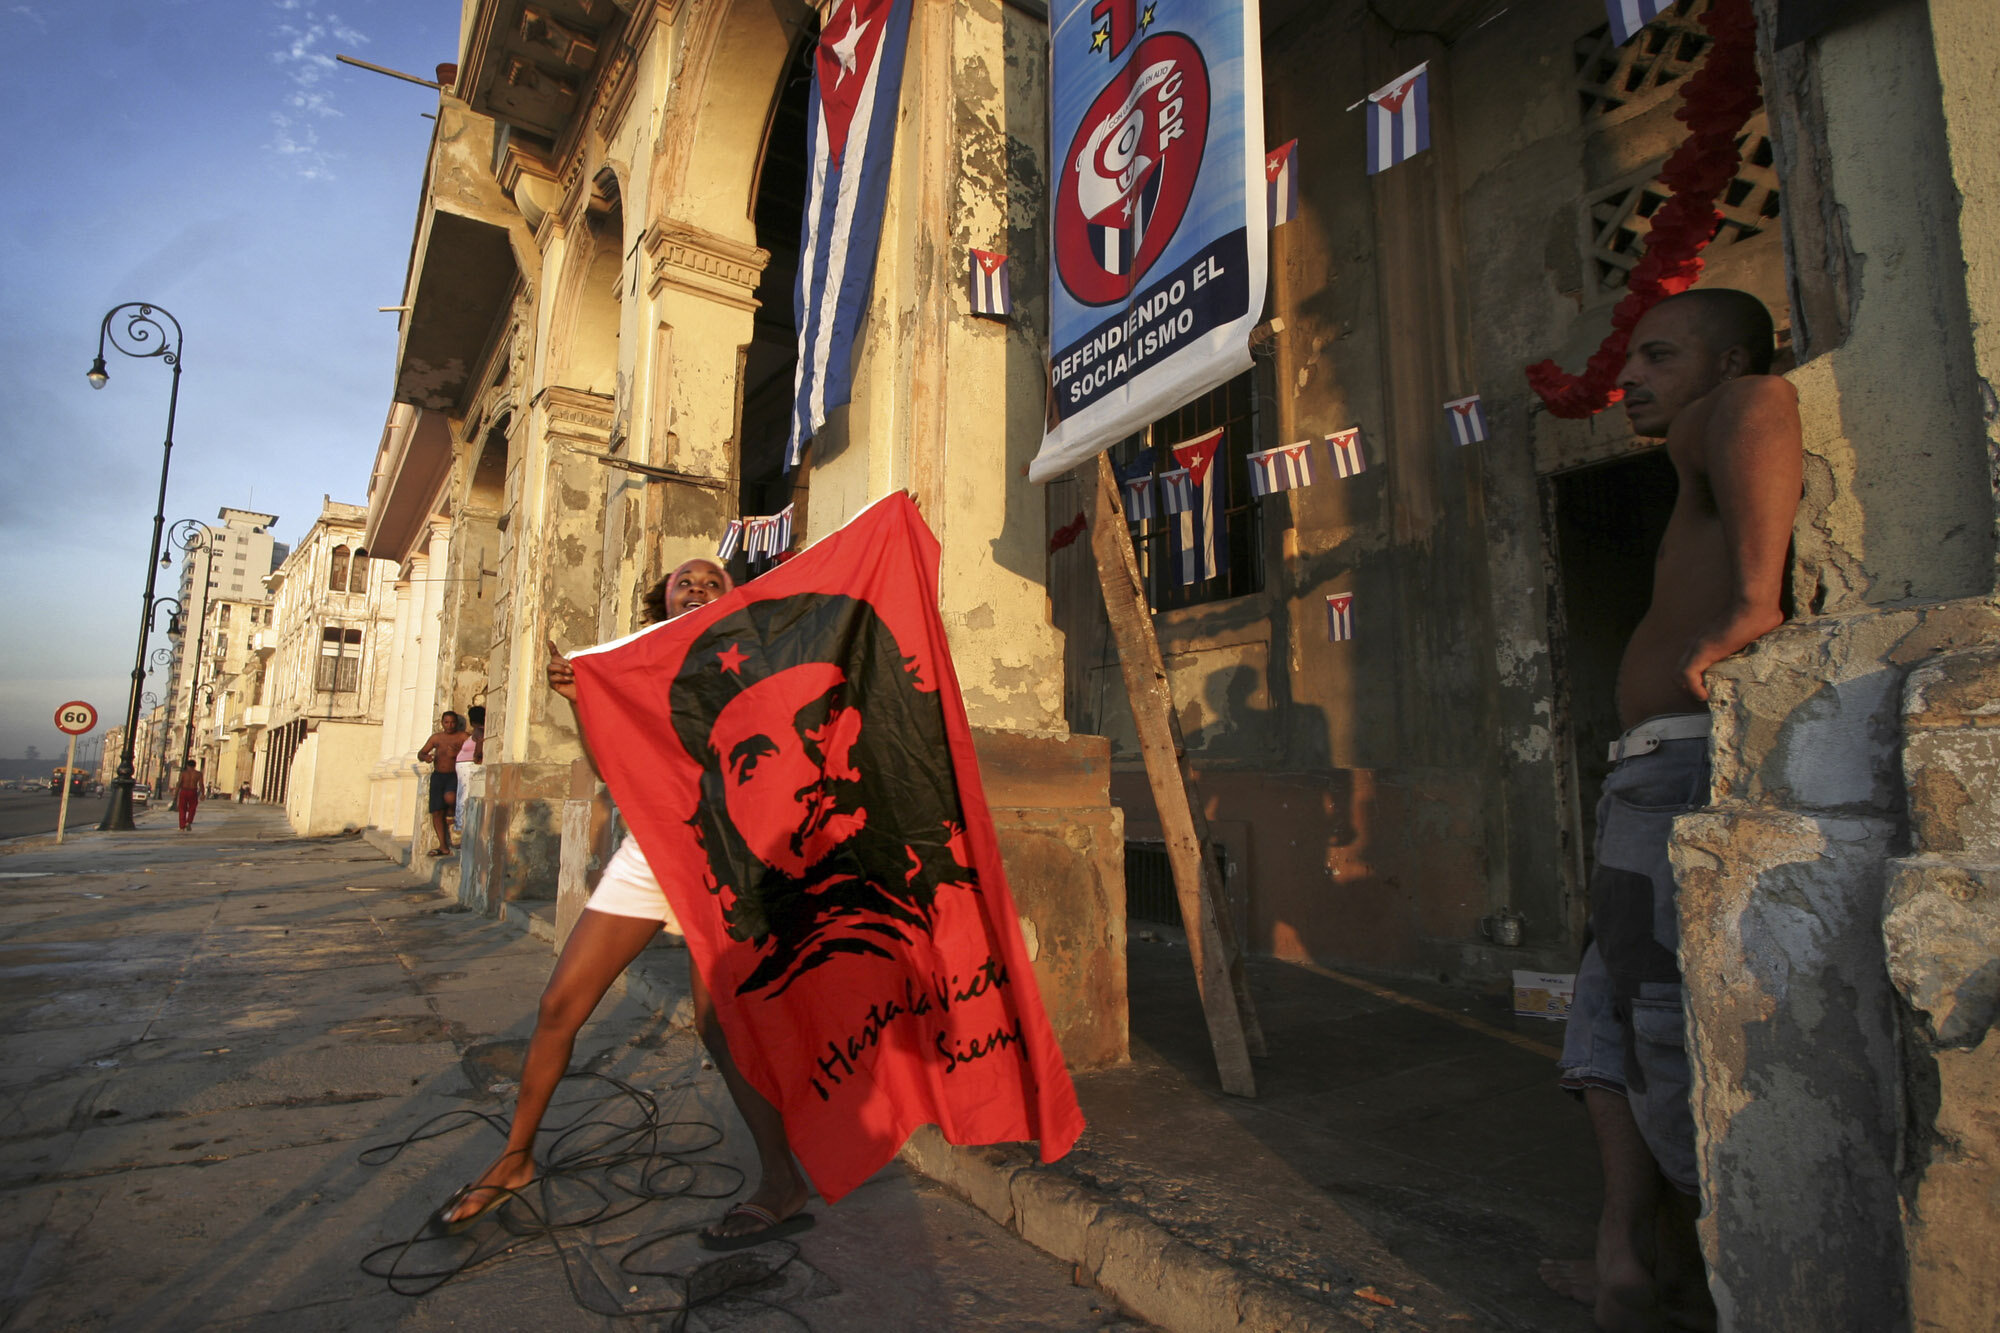  A Cuban woman carries a Che Guevara flag as people are preparing for the CDr anniversary, Havana's Malecon, 2005.          